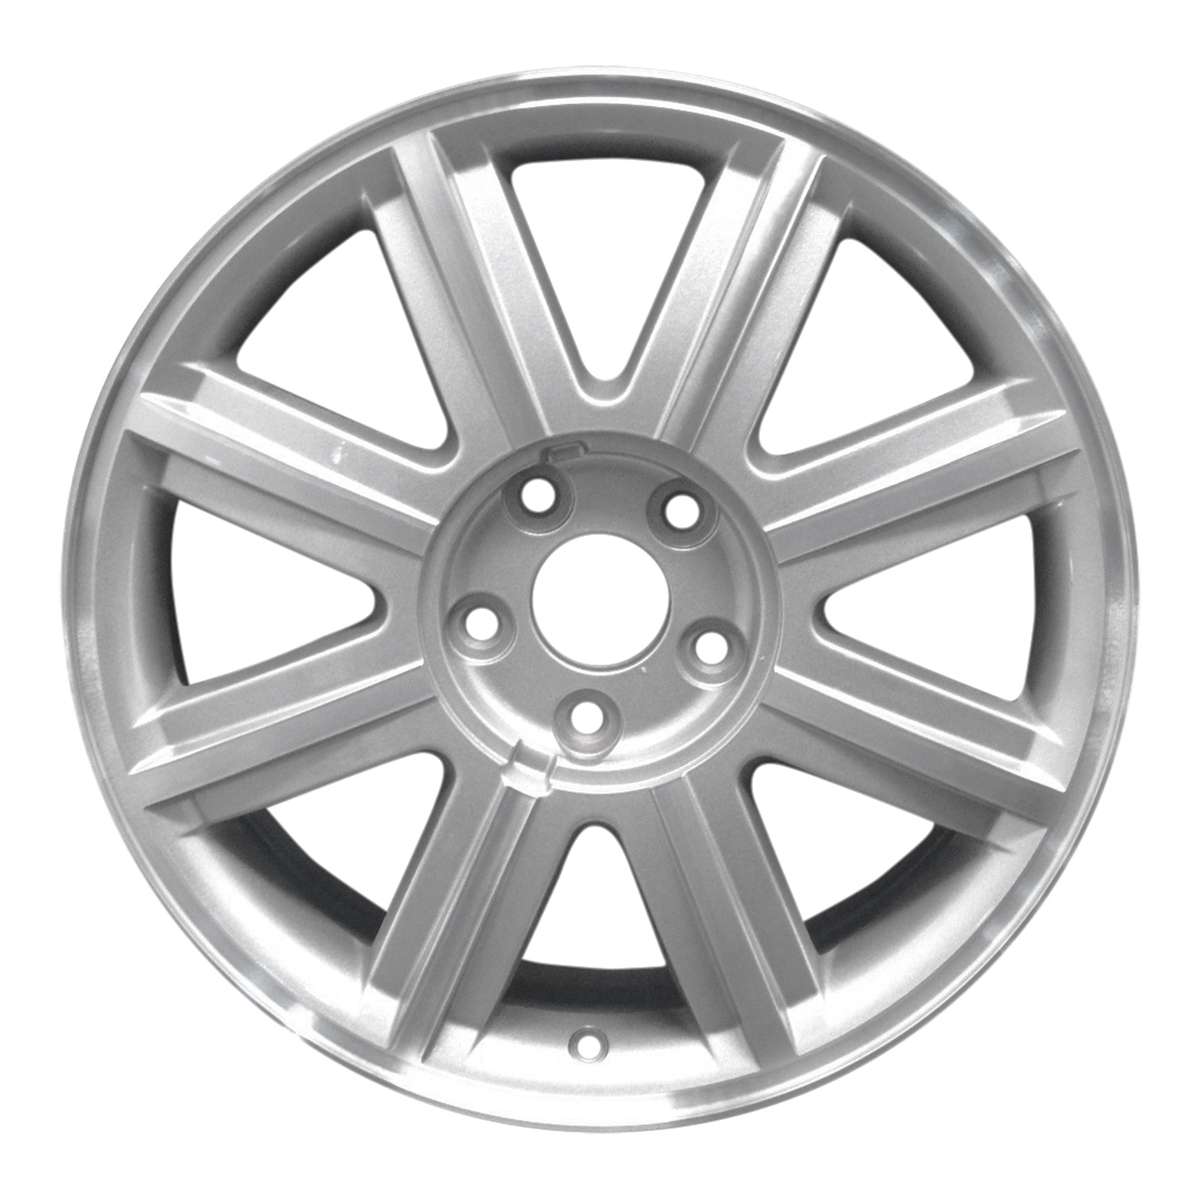 2005 Ford Five Hundred New 18" Replacement Wheel Rim RW3581MS